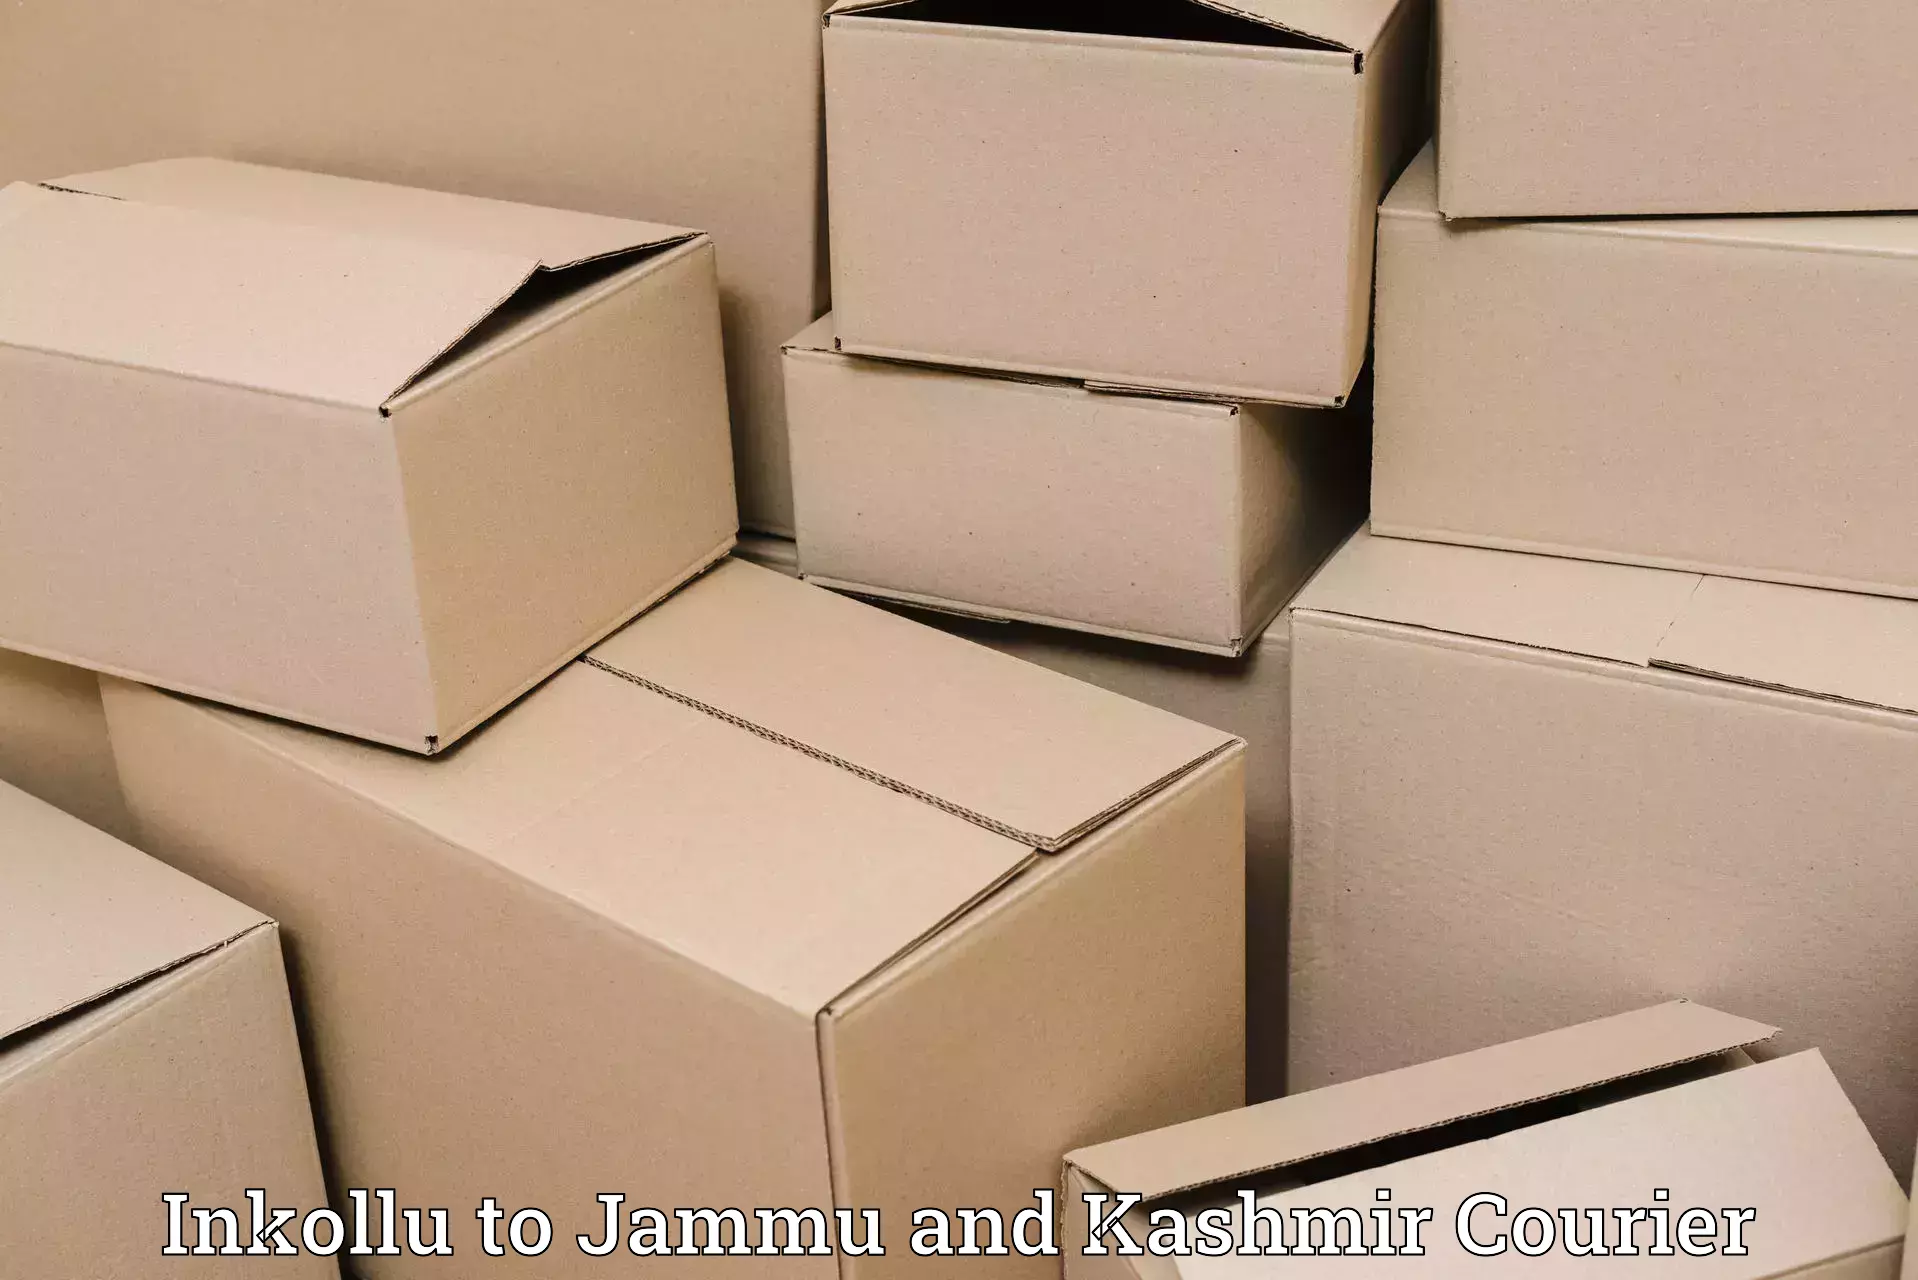 Rapid shipping services in Inkollu to Baramulla